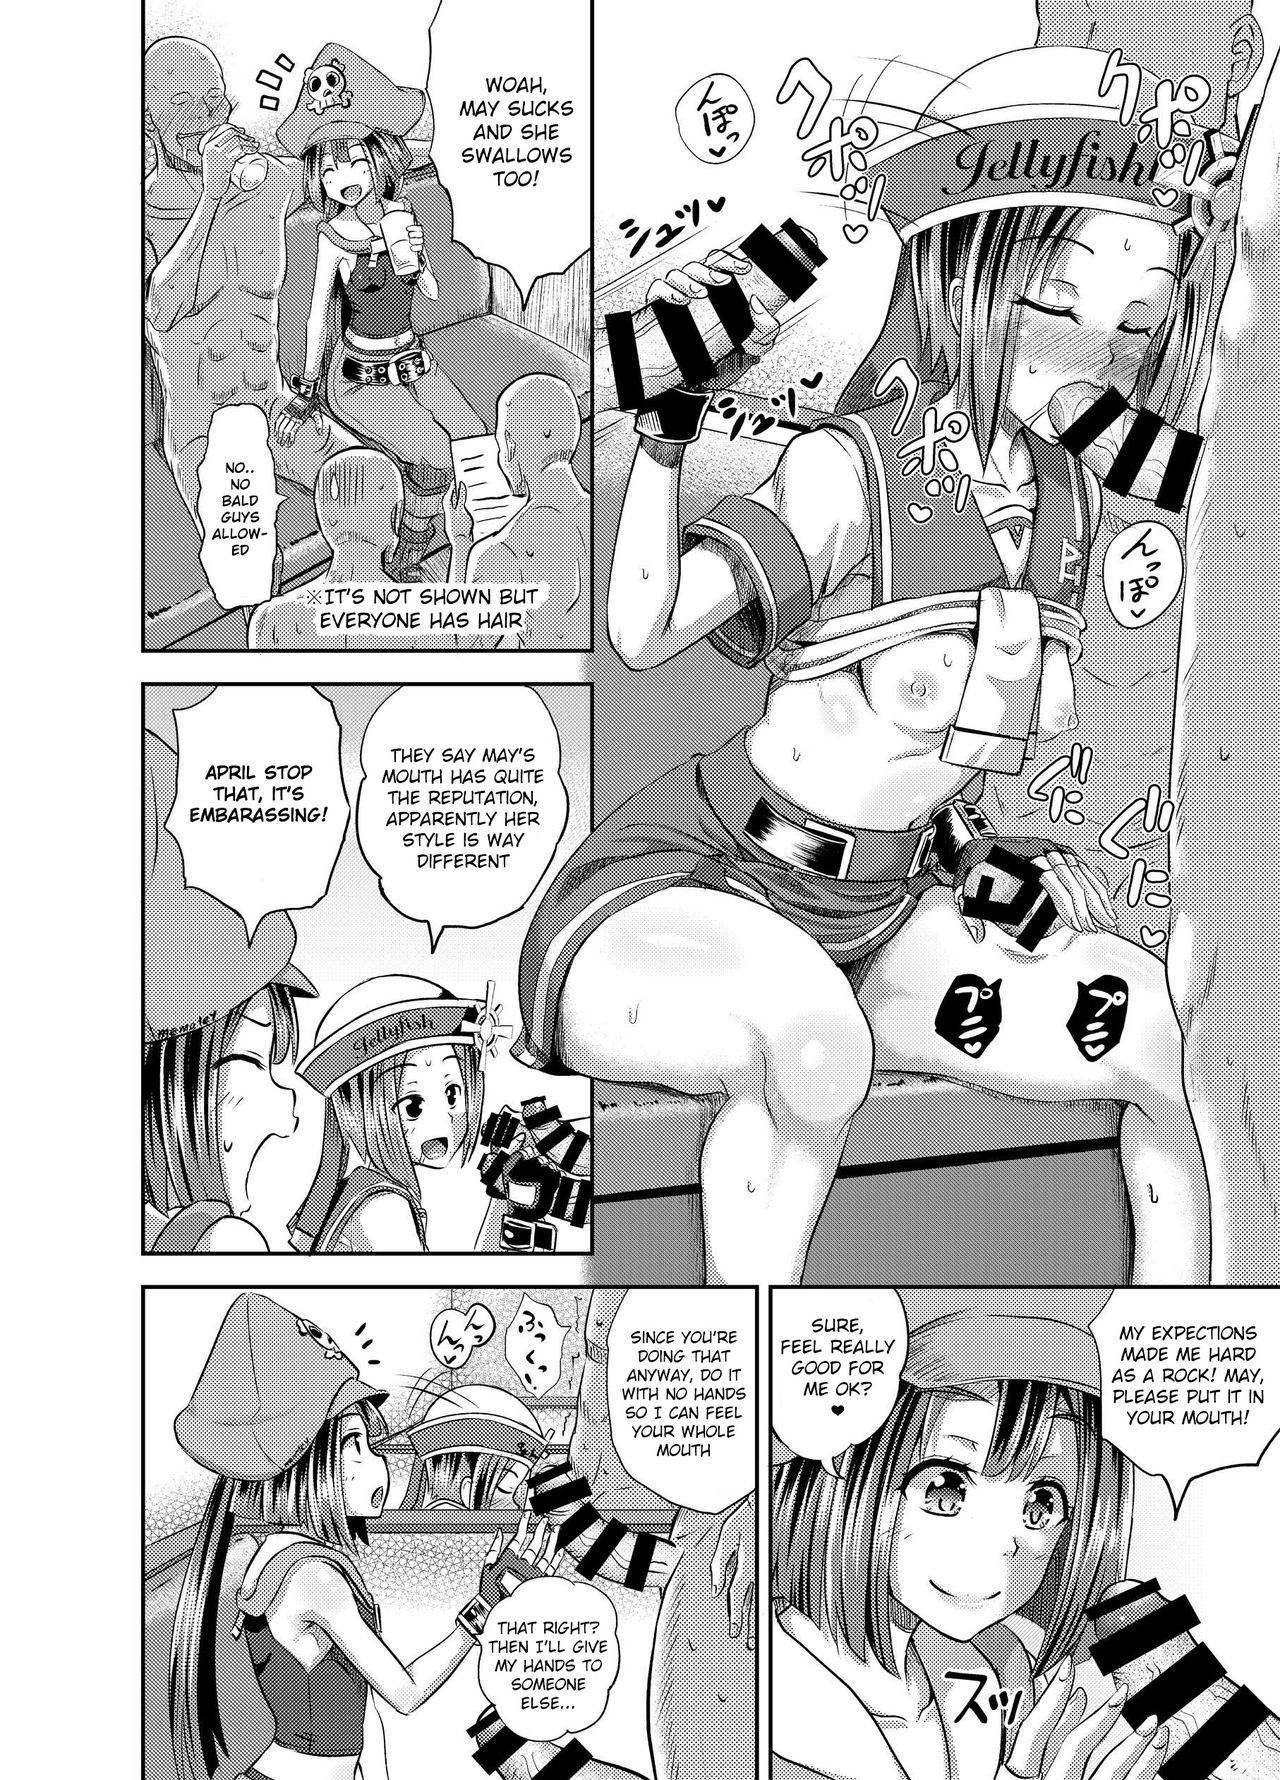 Penis Sucking Jellyfish Kaizokudan e Youkoso! | Welcome to The Jellyfish Pleasure Club! - Guilty gear Spanking - Page 5